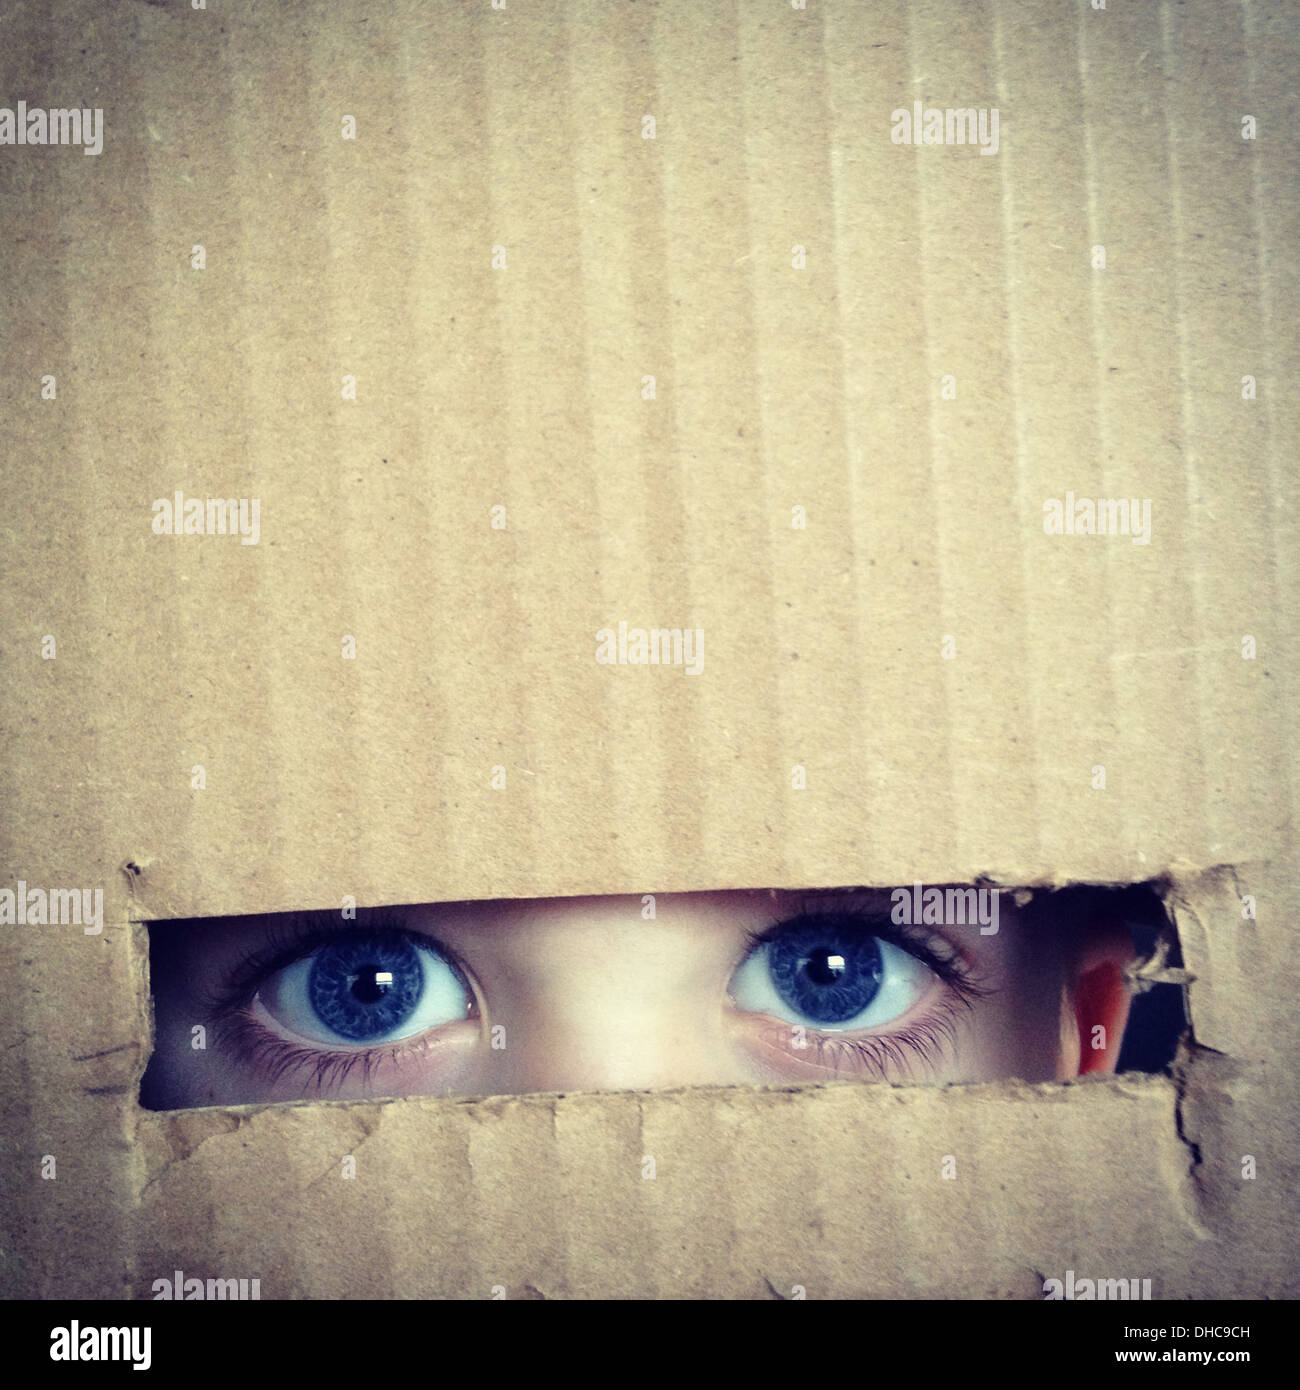 Boy's Eyes Looking Through Hole in Cardboard Box, Close Up Stock Photo